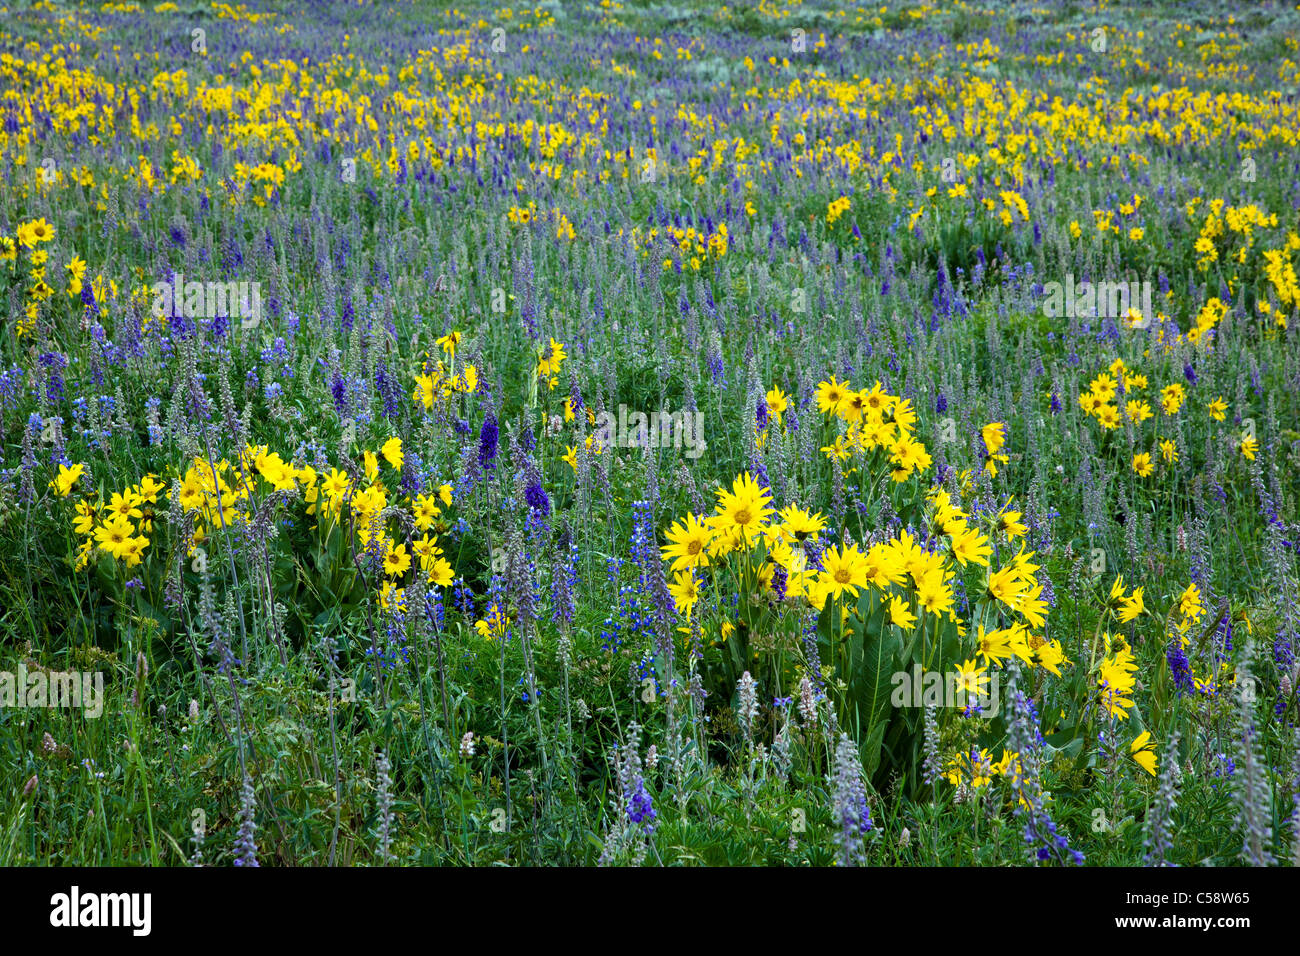 Blue Lupine and Aspen Sunflowers along Brush Creek Road near Crested Butte, Colorado, USA. Stock Photo